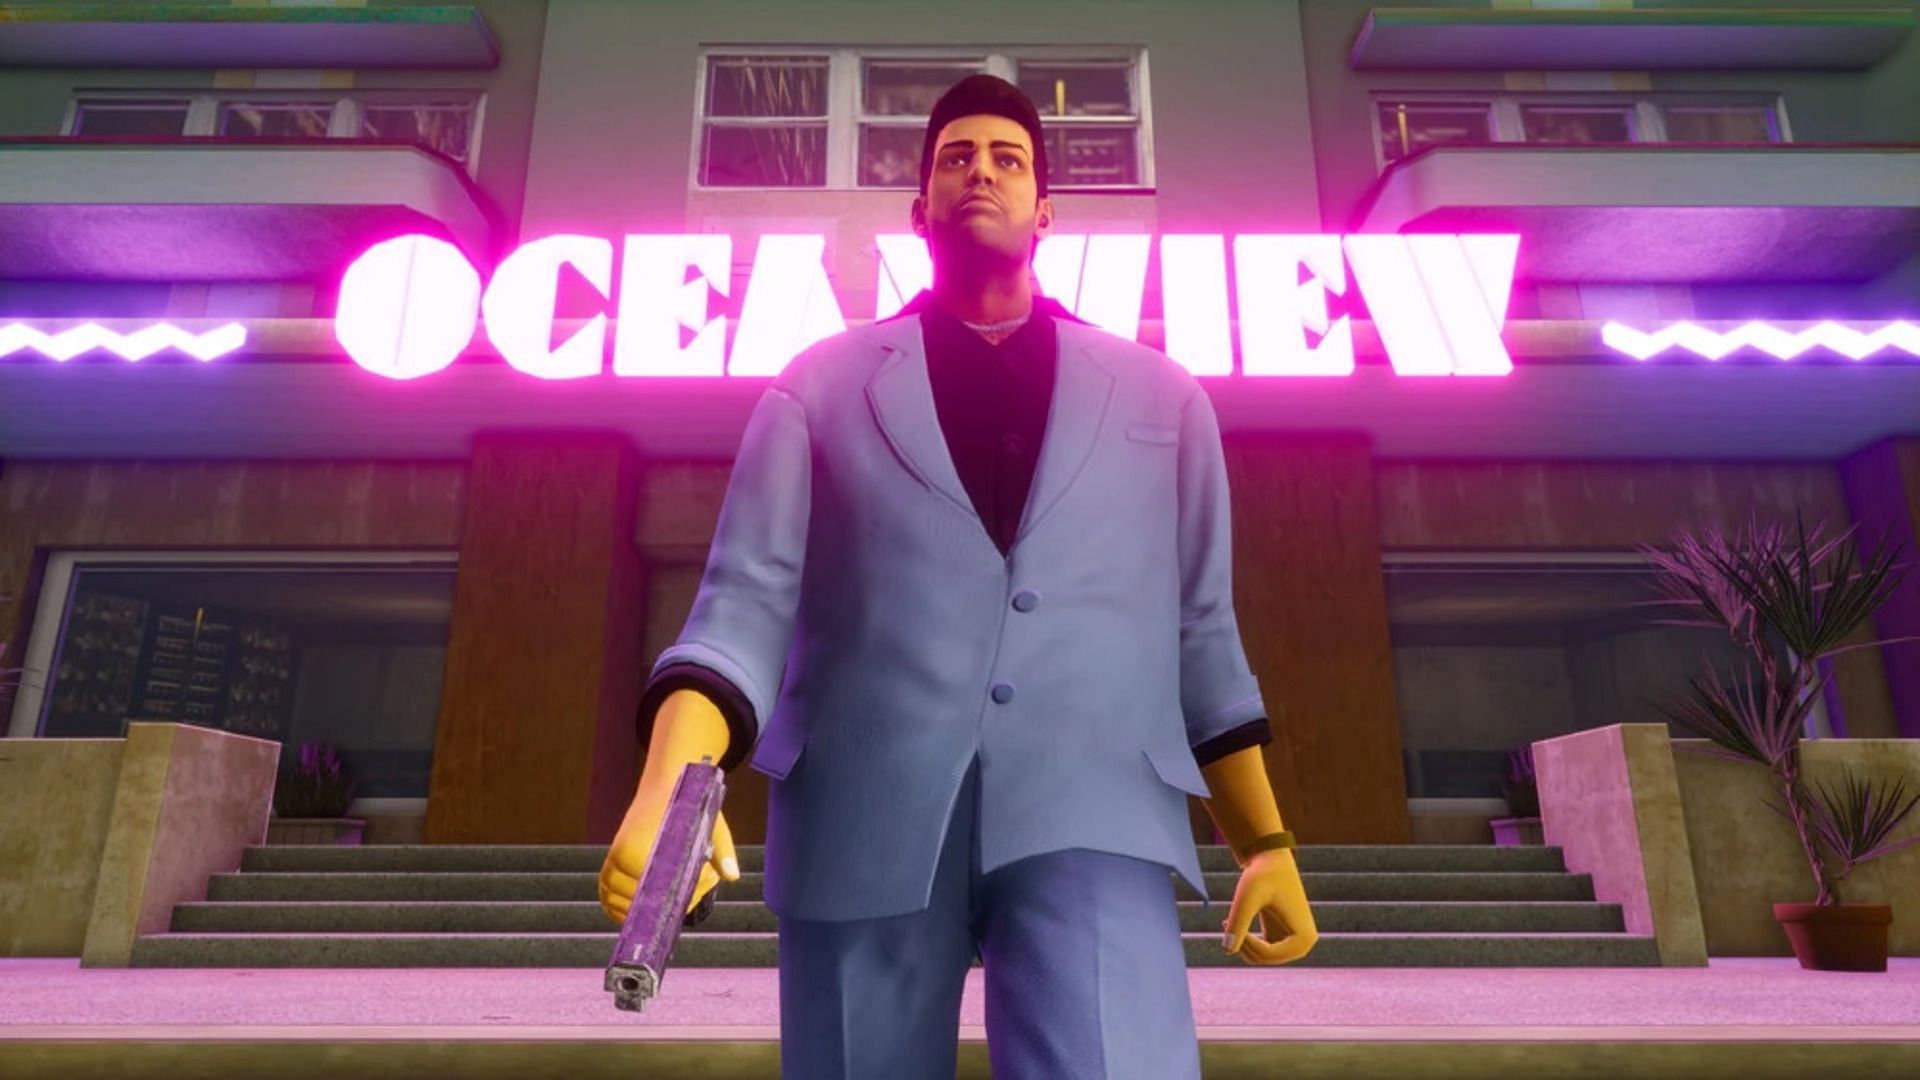 5 significant differences between the original GTA Vice City and its Definitive Edition